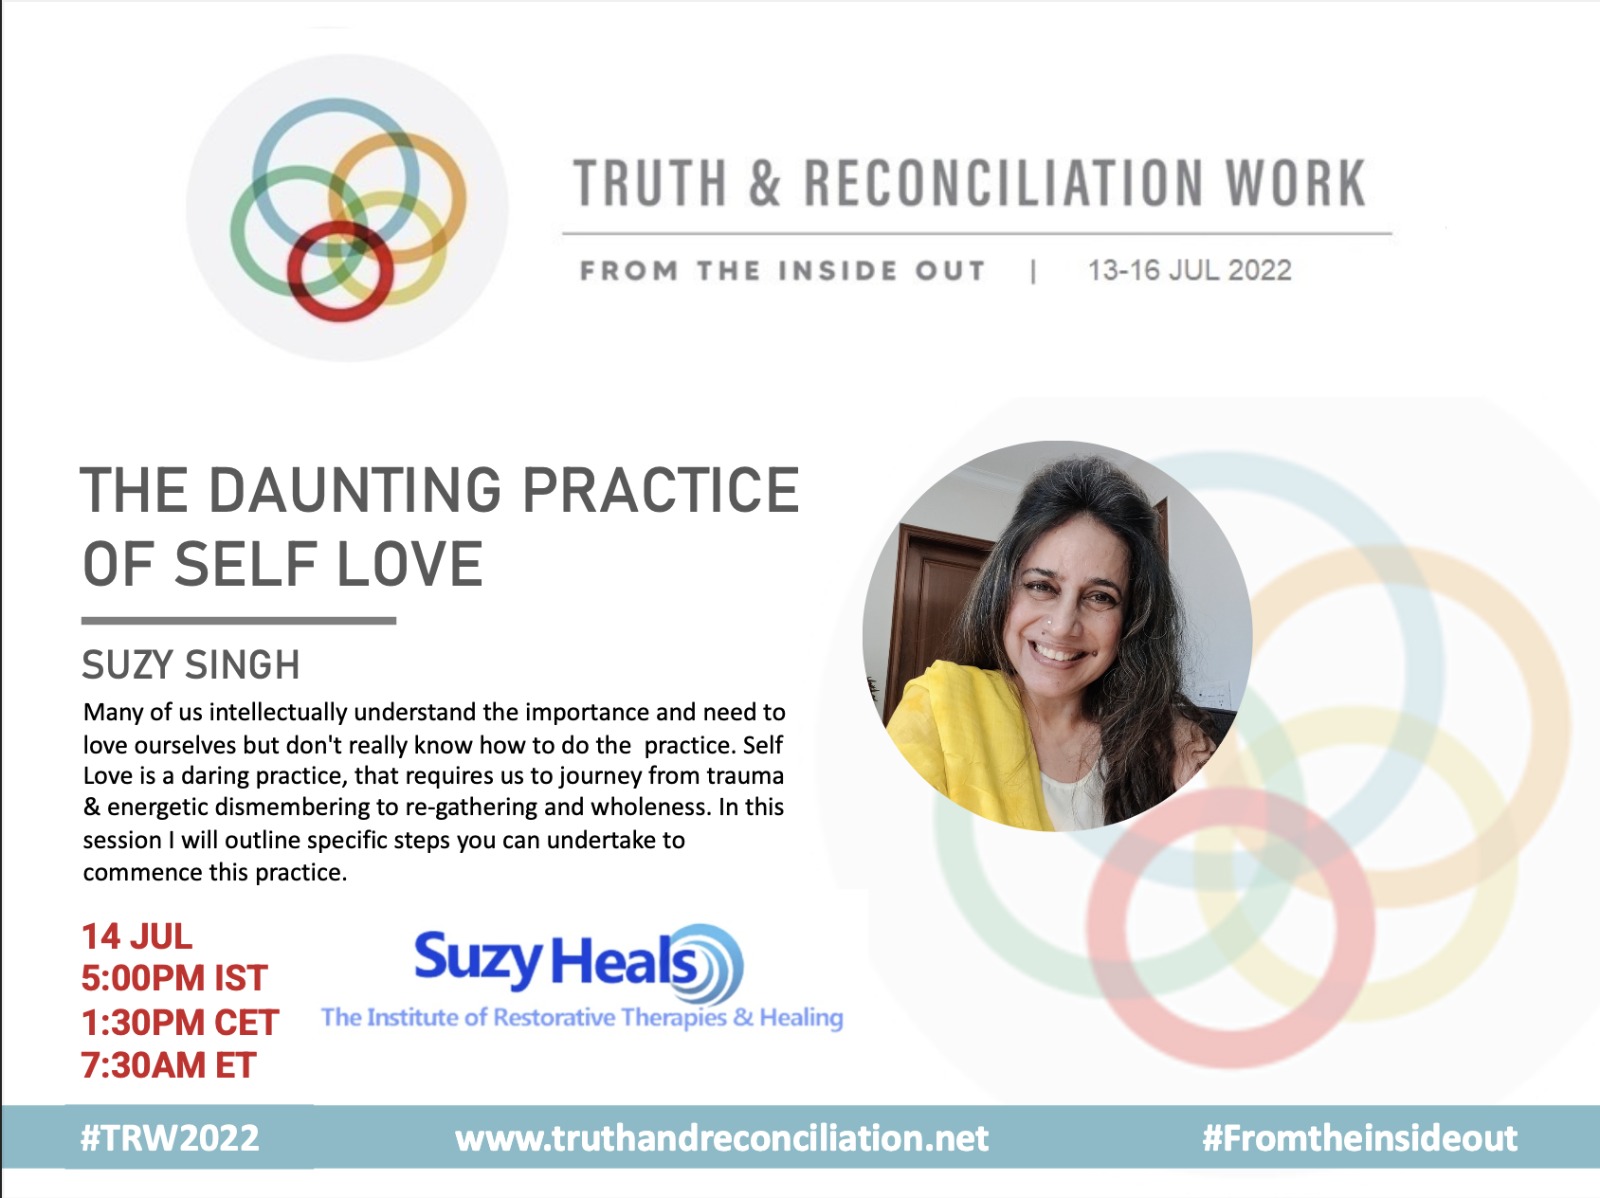 The Daunting Practice of Self Love by Suzy Singh